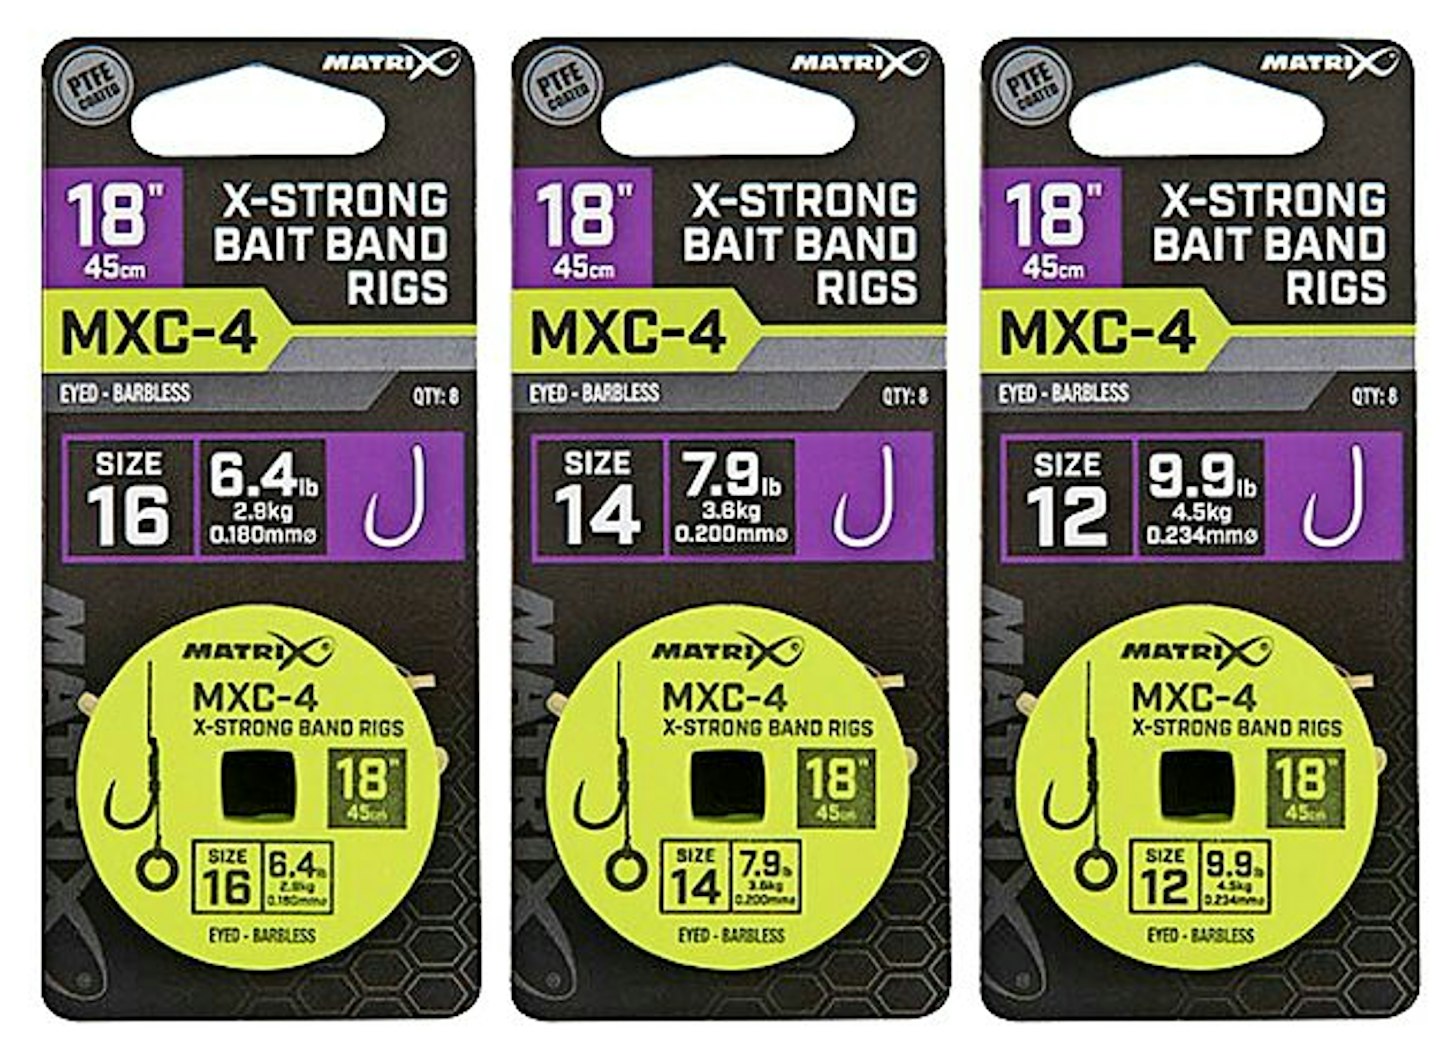 Matrix MXC-4 18-ins X-Strong Band Rigs